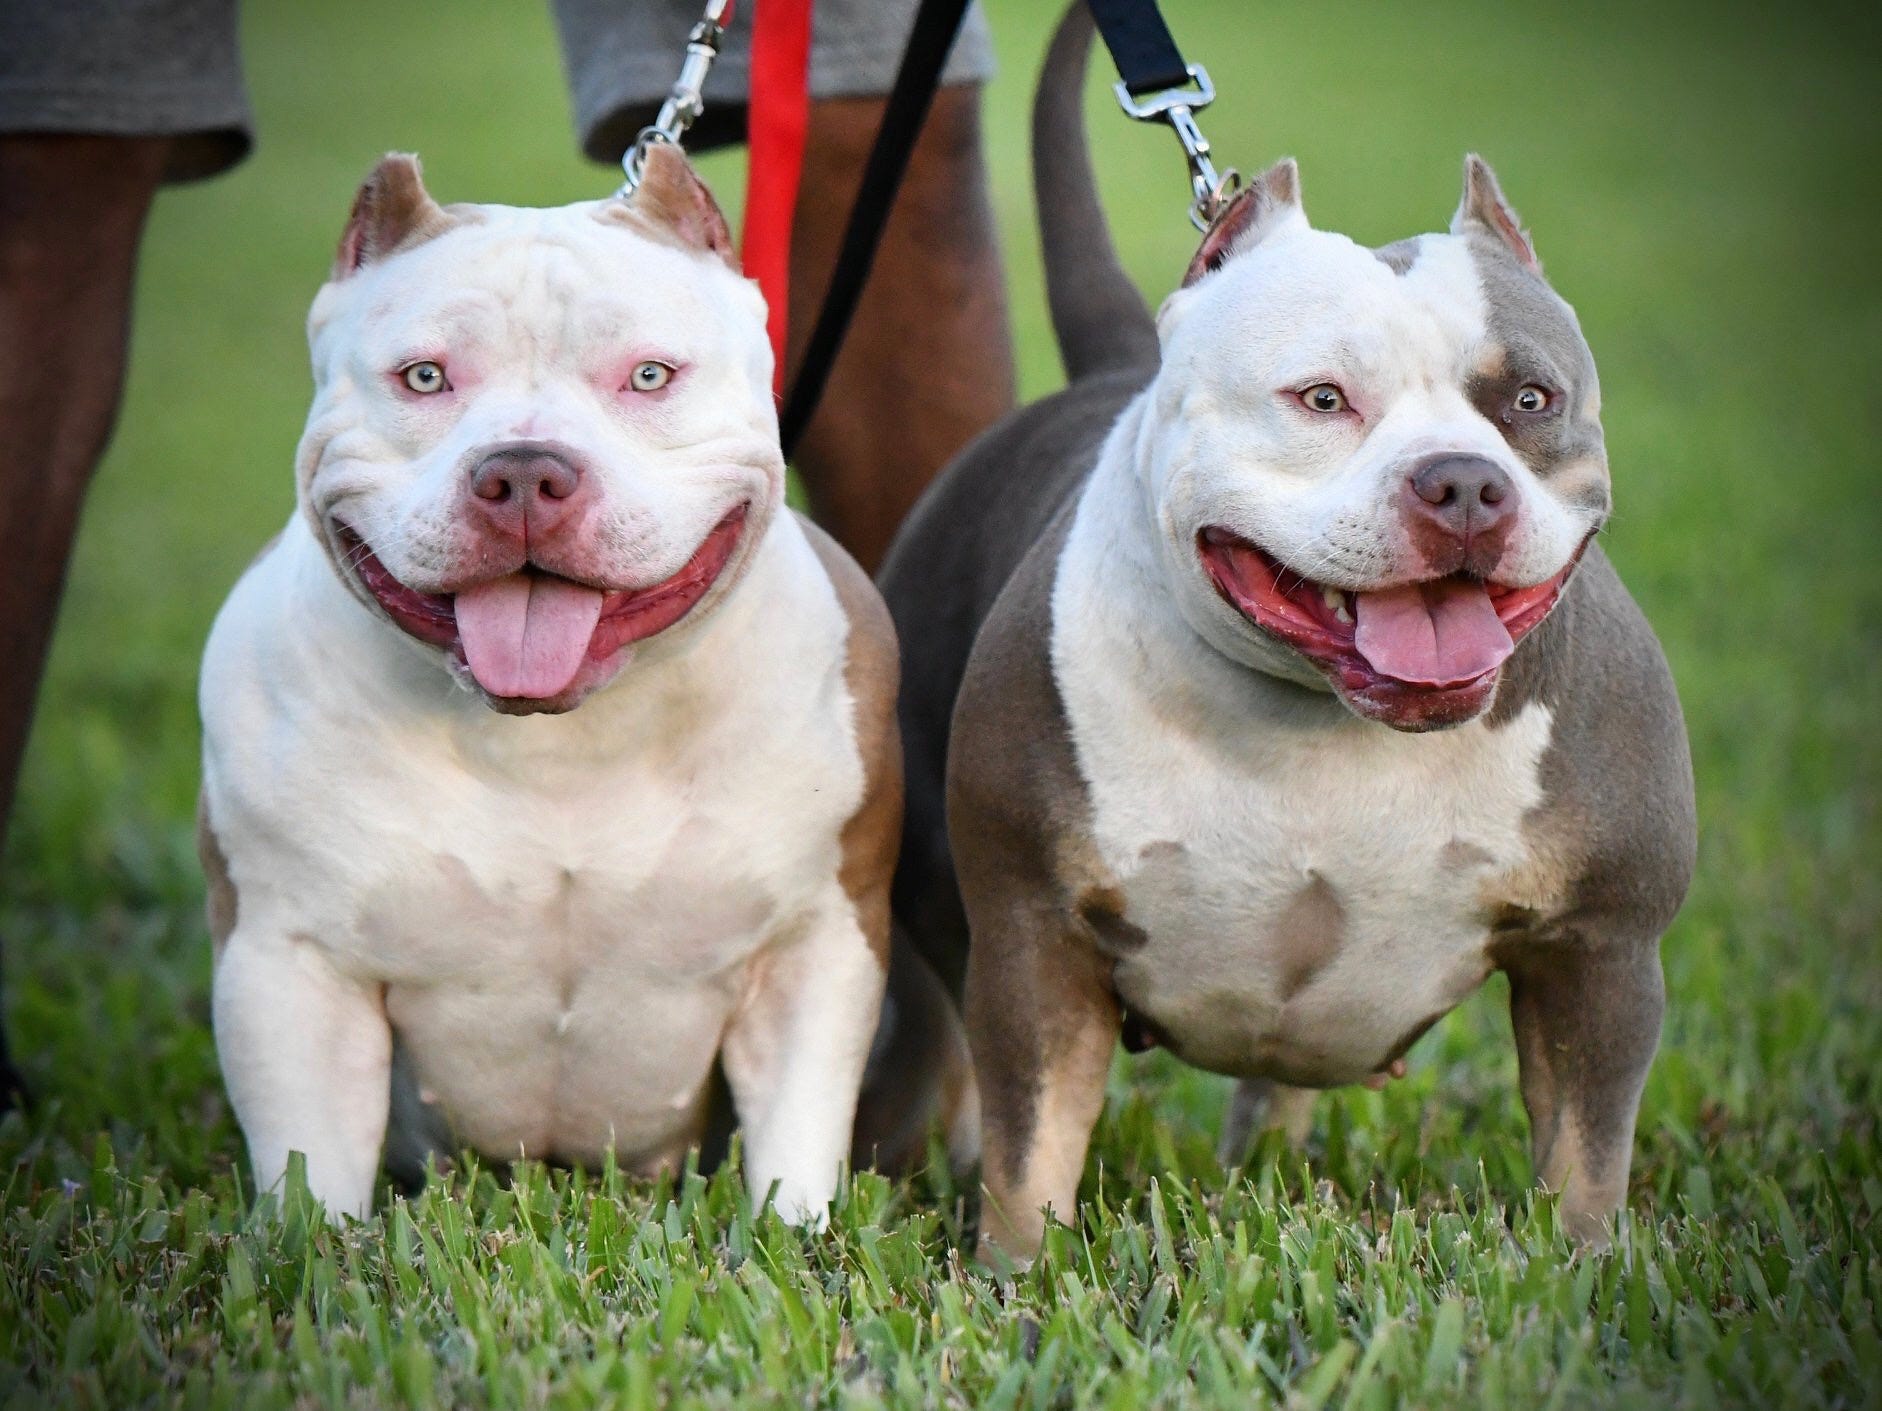 BEST OF THE TRI COLOR AMERICAN BULLY, AMAZING POCKET BULLIES, by BULLY  KING Magazine, BULLY KING Magazine